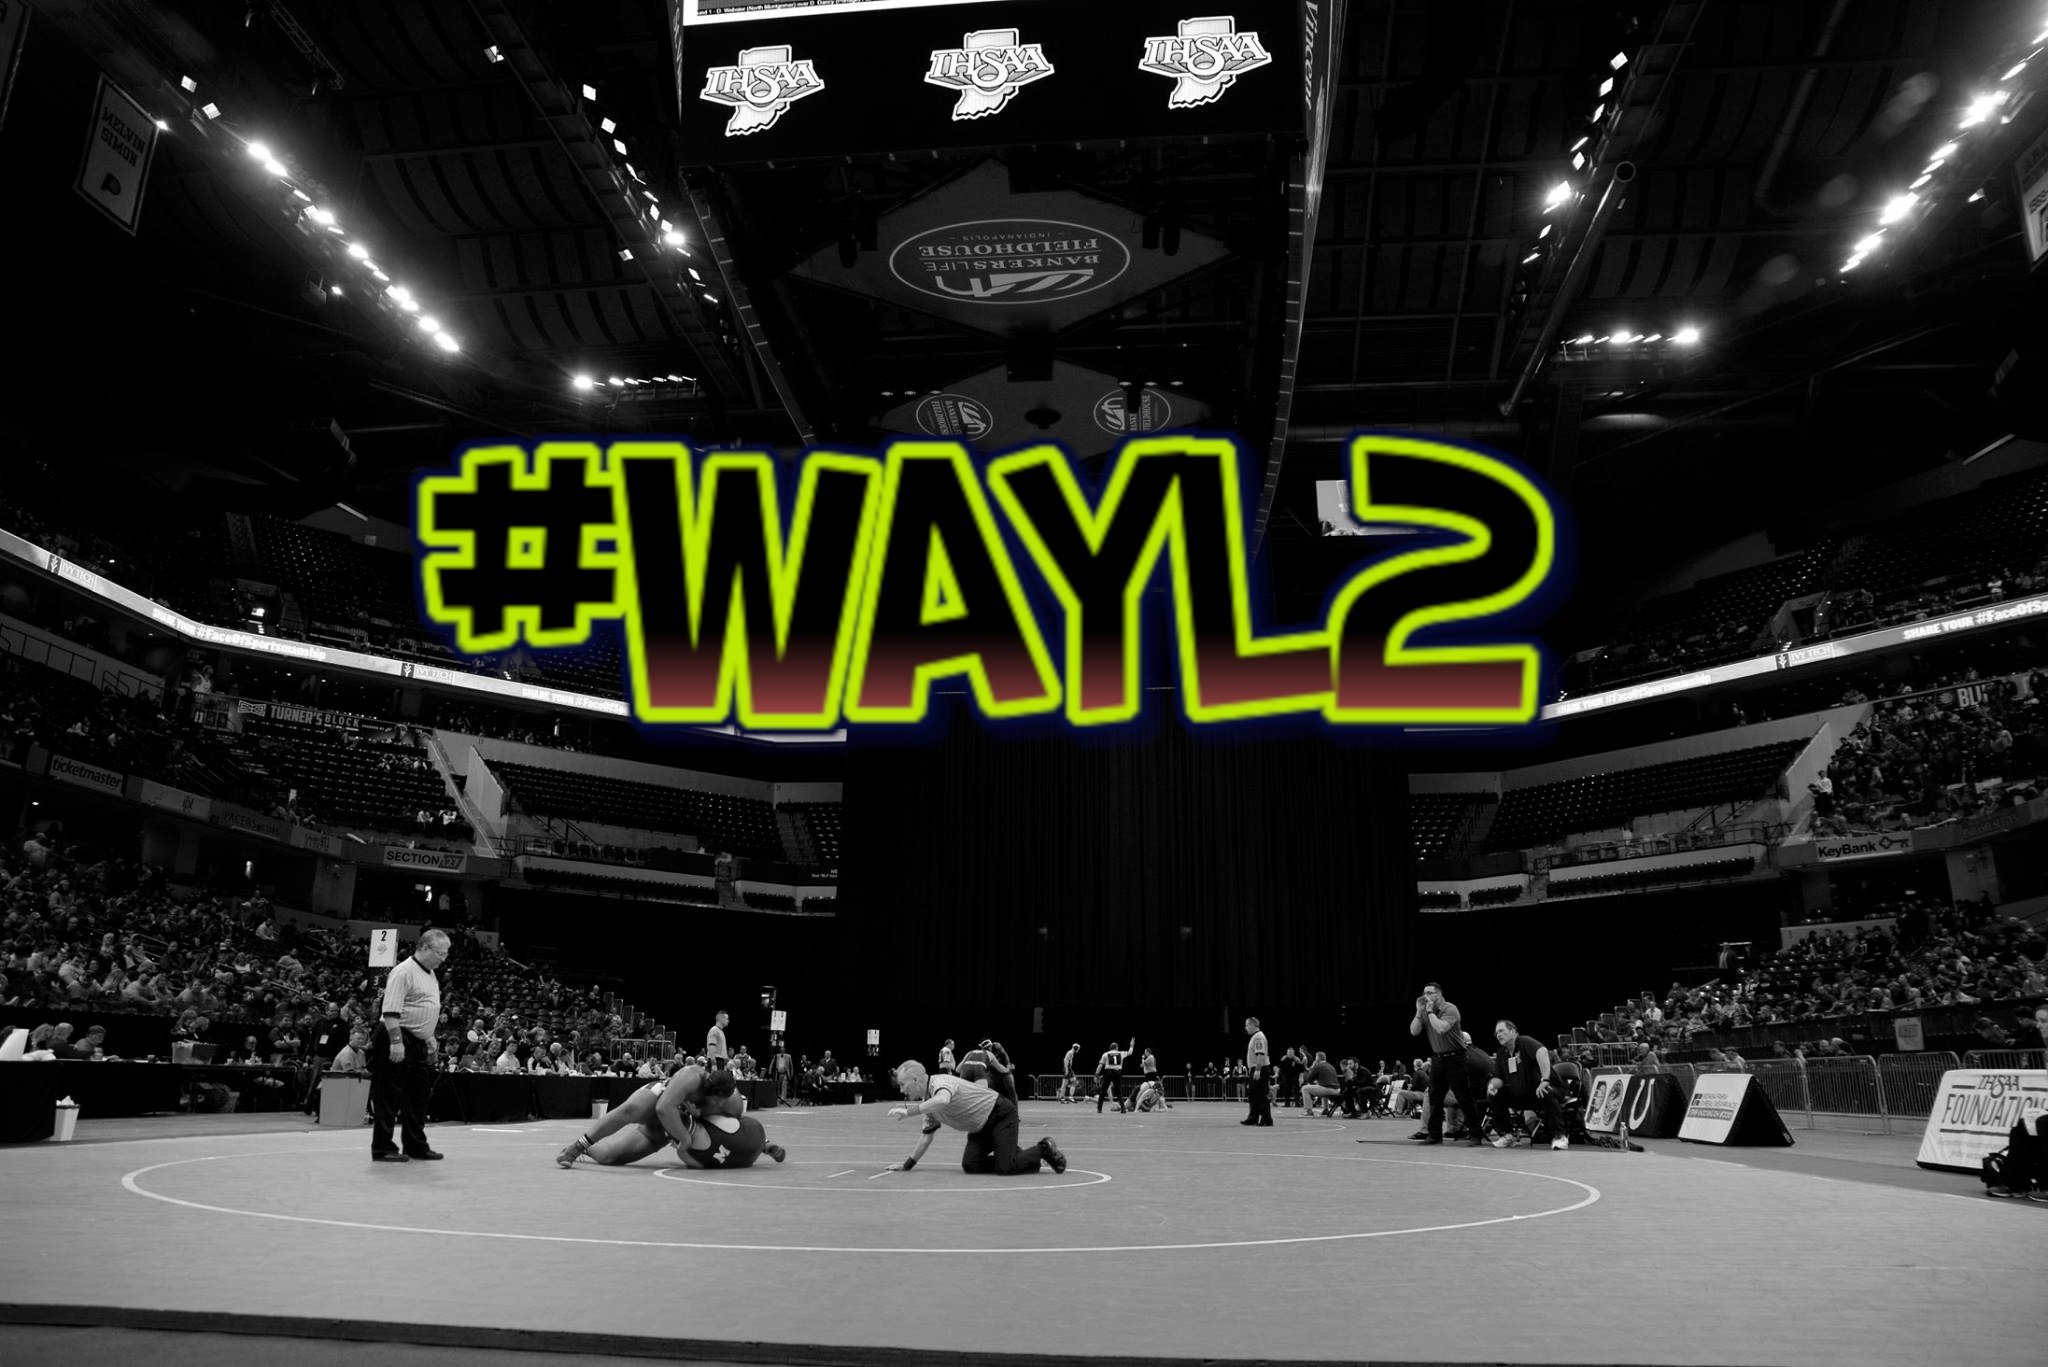 More information about "2023 State Finals #WAYL2"